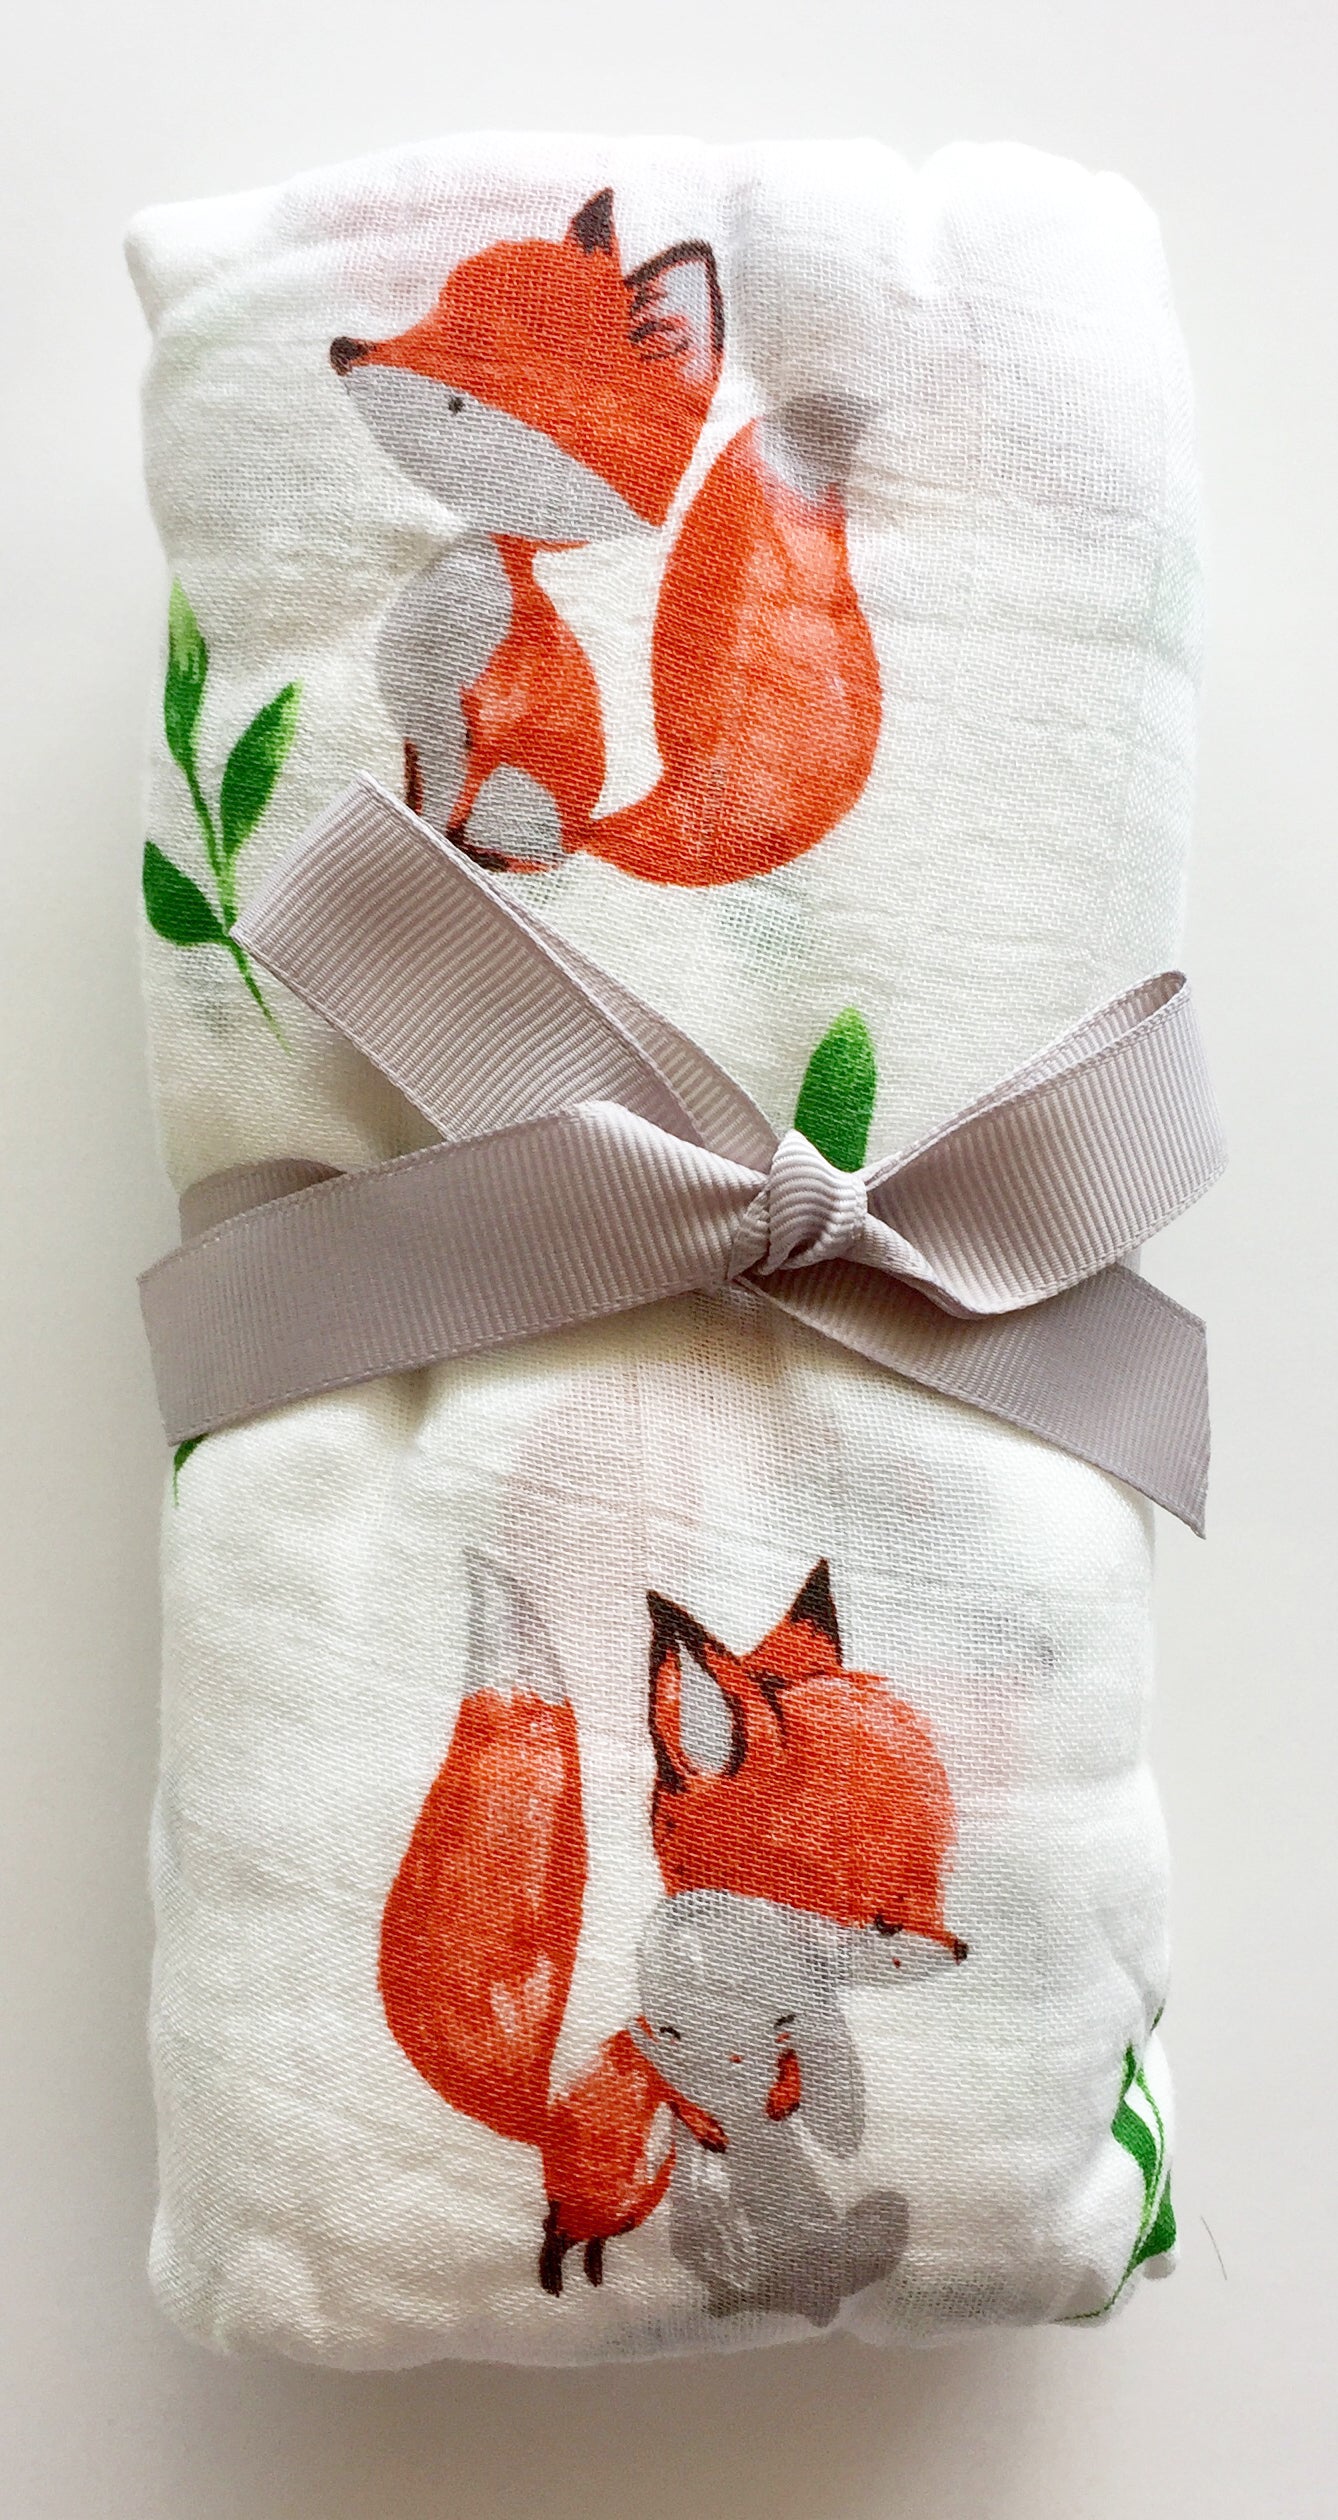 Baby's Organic Bamboo & Cotton Muslin Swaddle Blanket